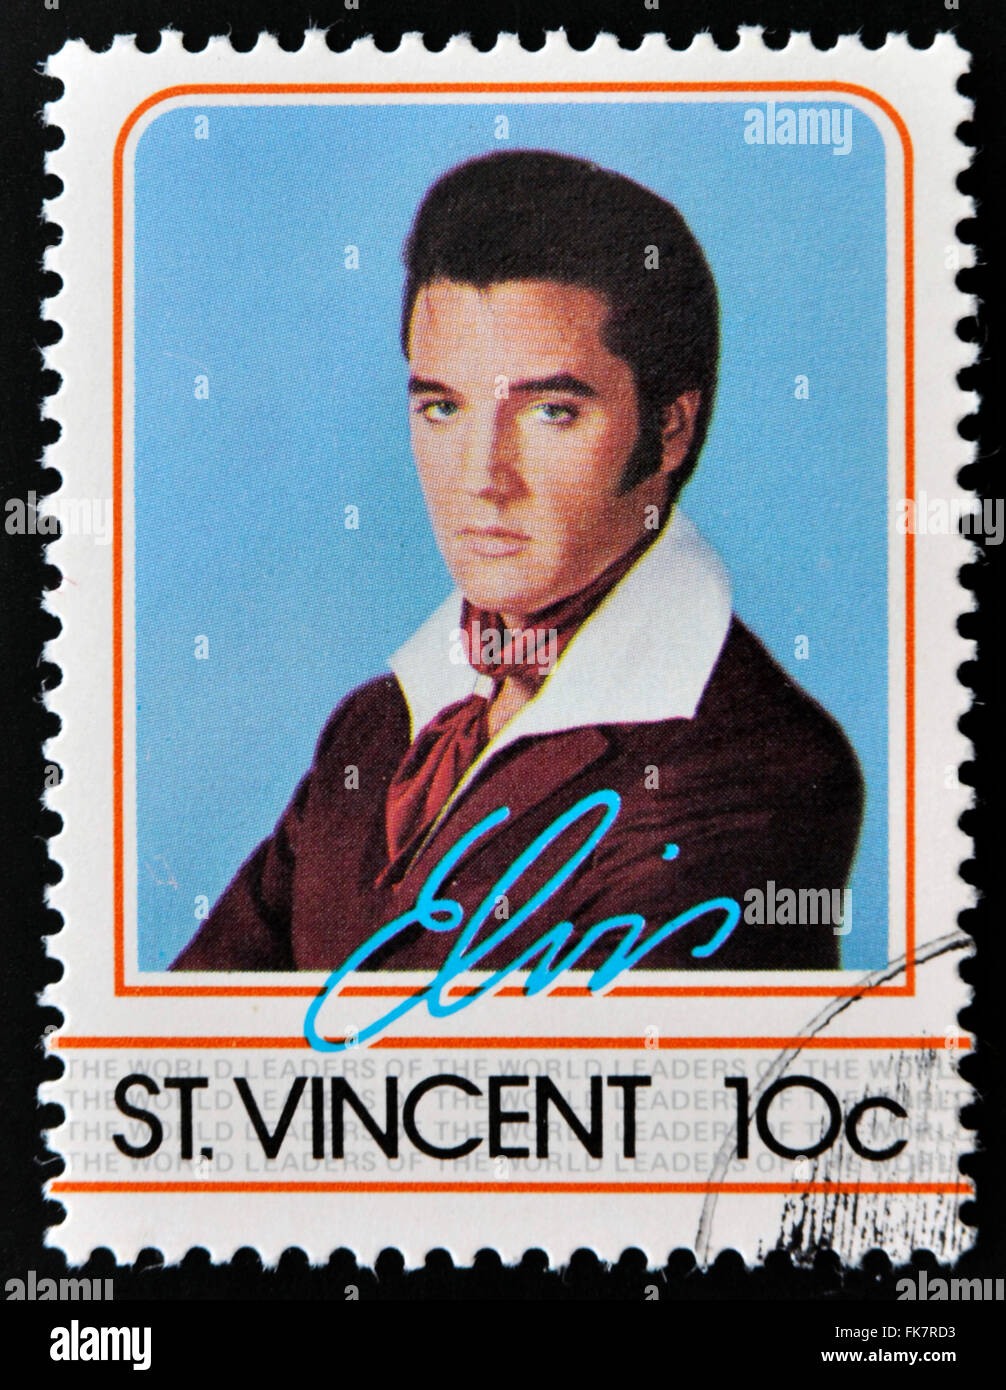 ST. VINCENT - CIRCA 1985: A stamp printed in St. Vincent, shows Elvis Presley, circa 1985. Stock Photo